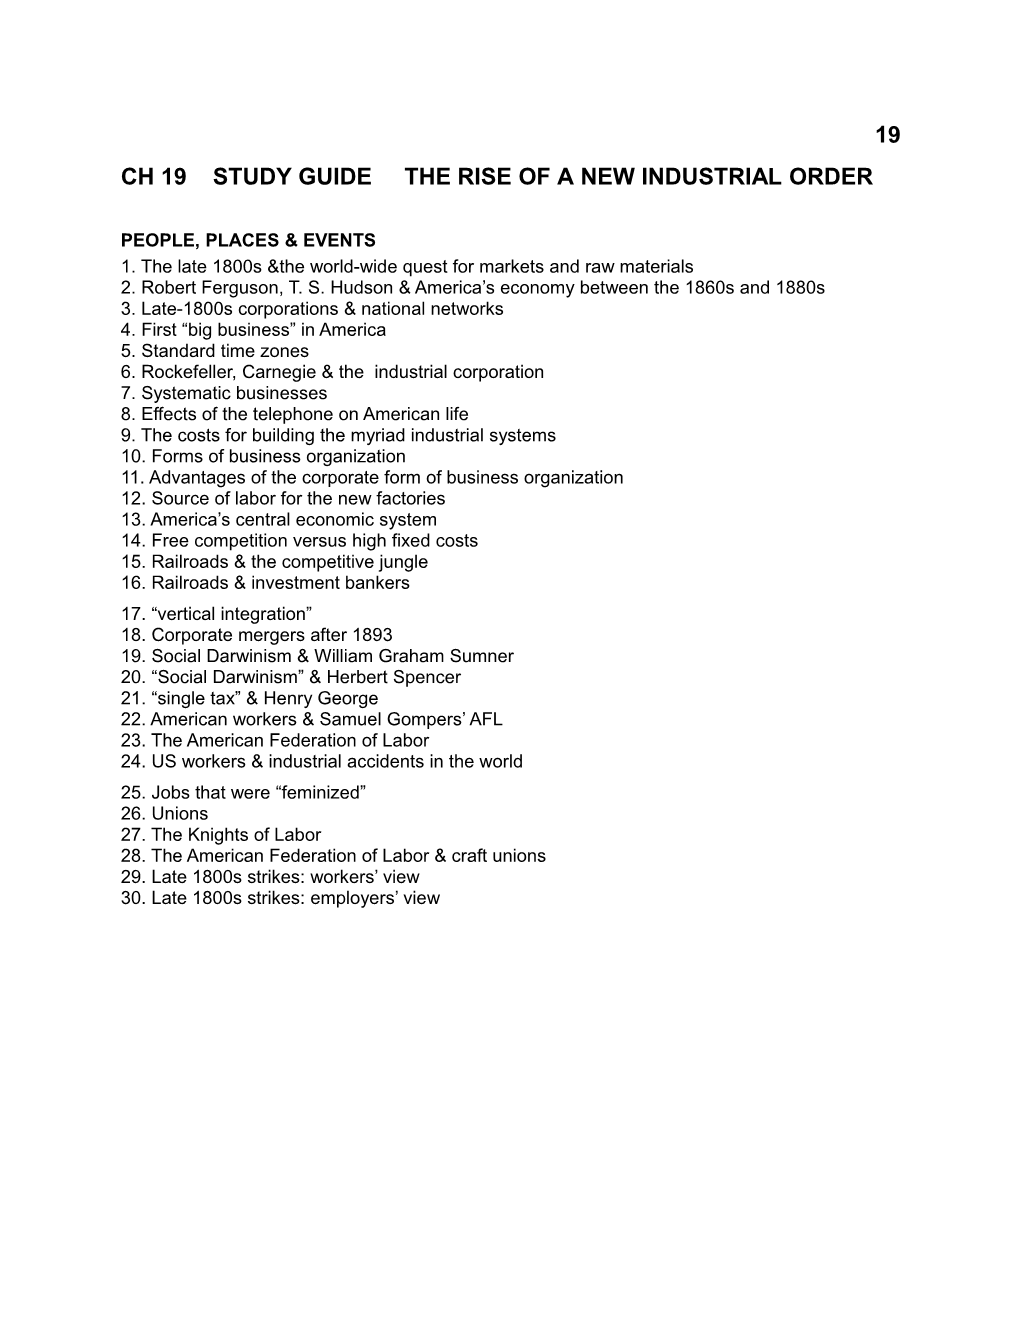 Ch 19 Study Guide the Rise of a New Industrial Order